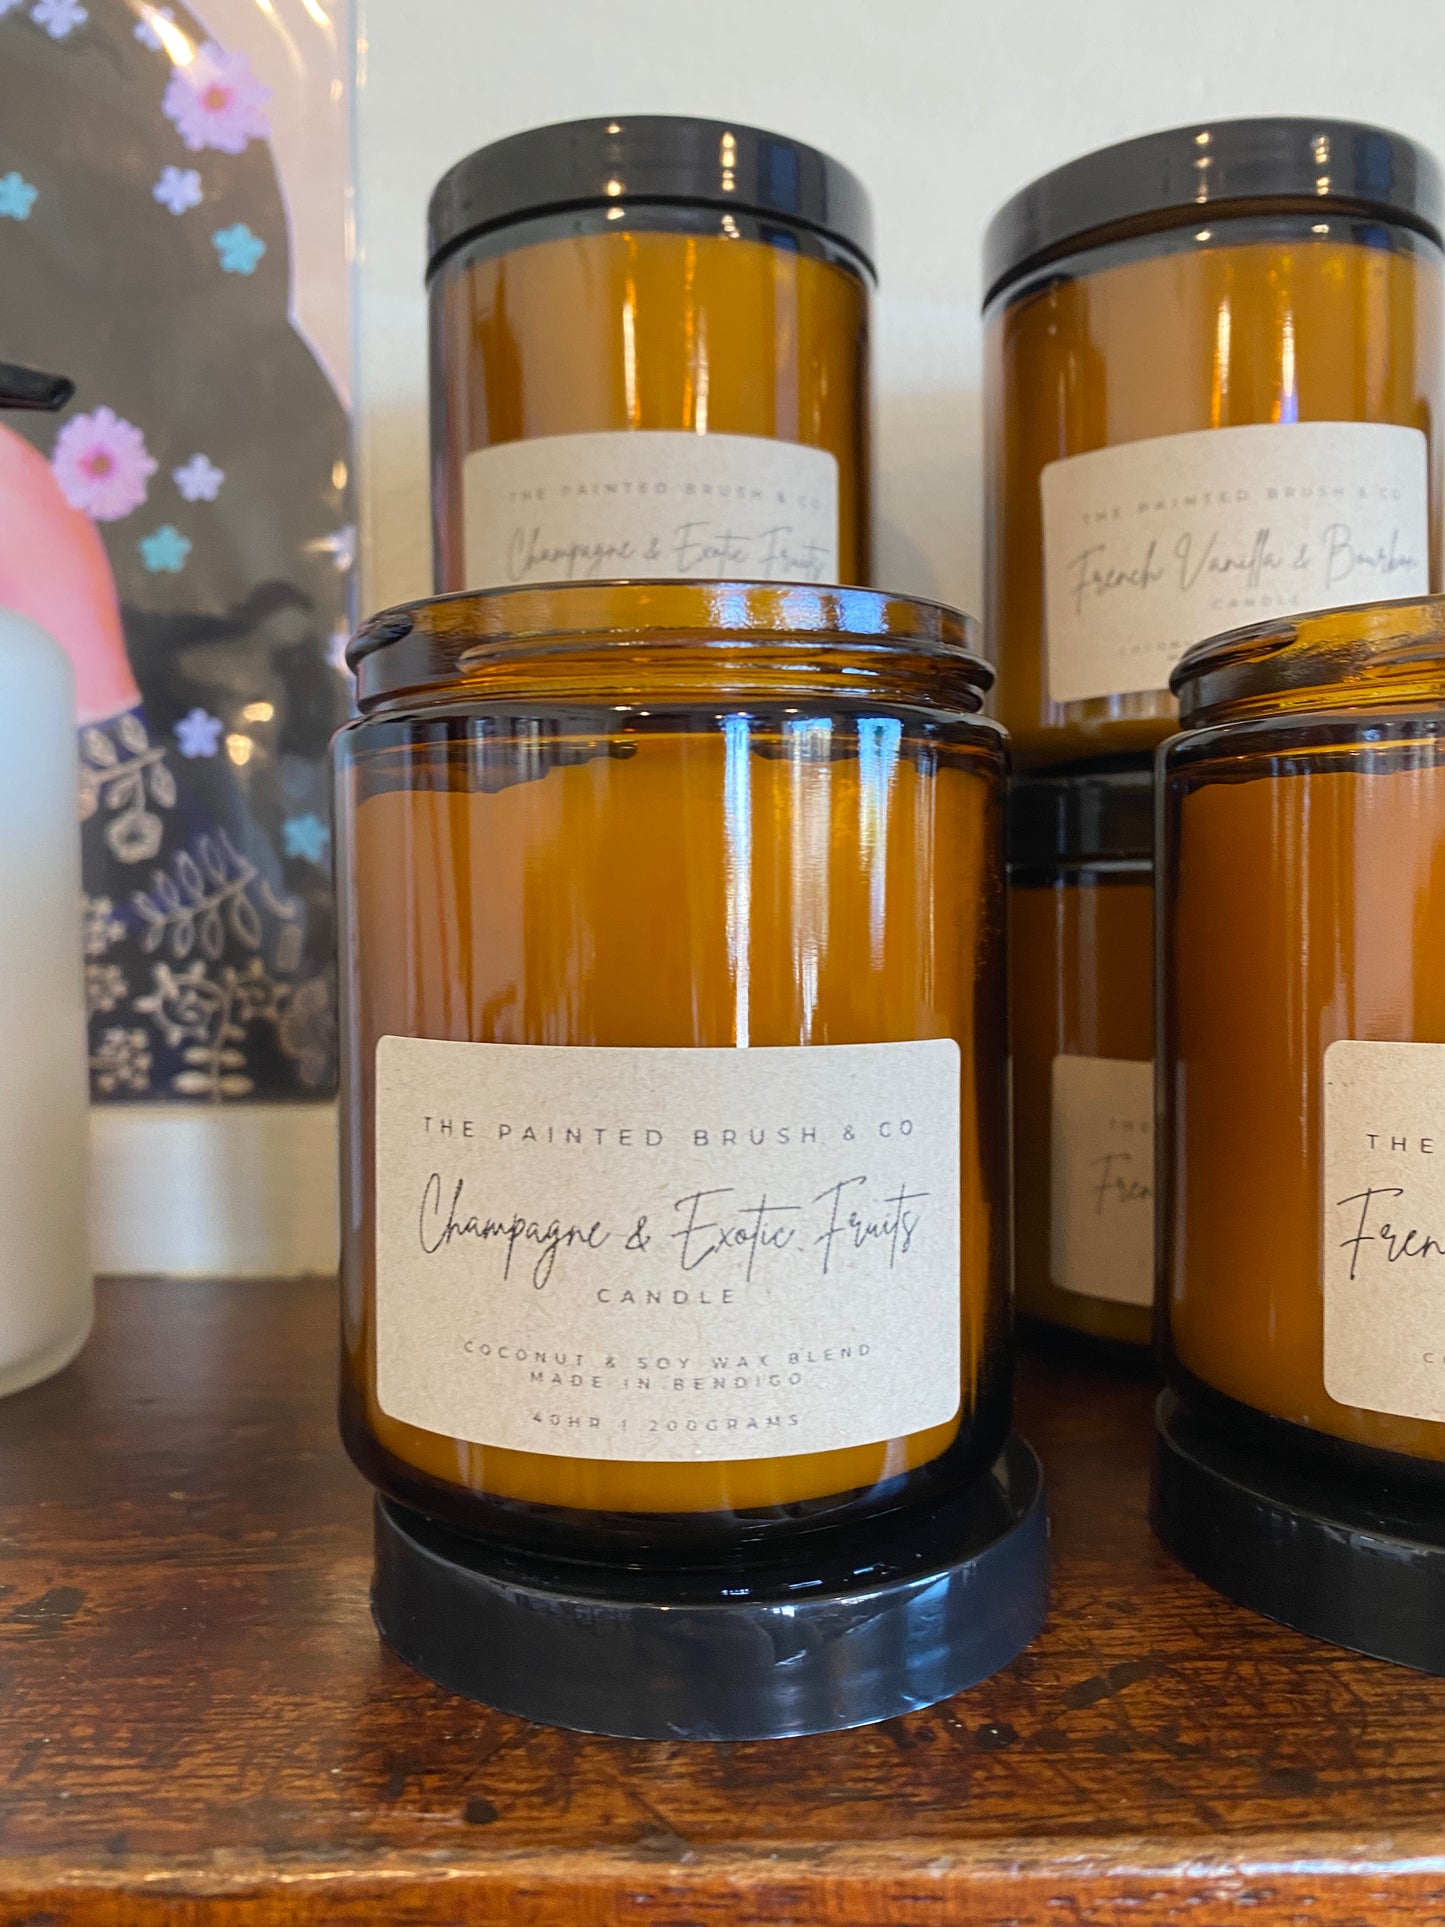 Champagne & Exotic Fruits | Coconut & Soy Wax Candle